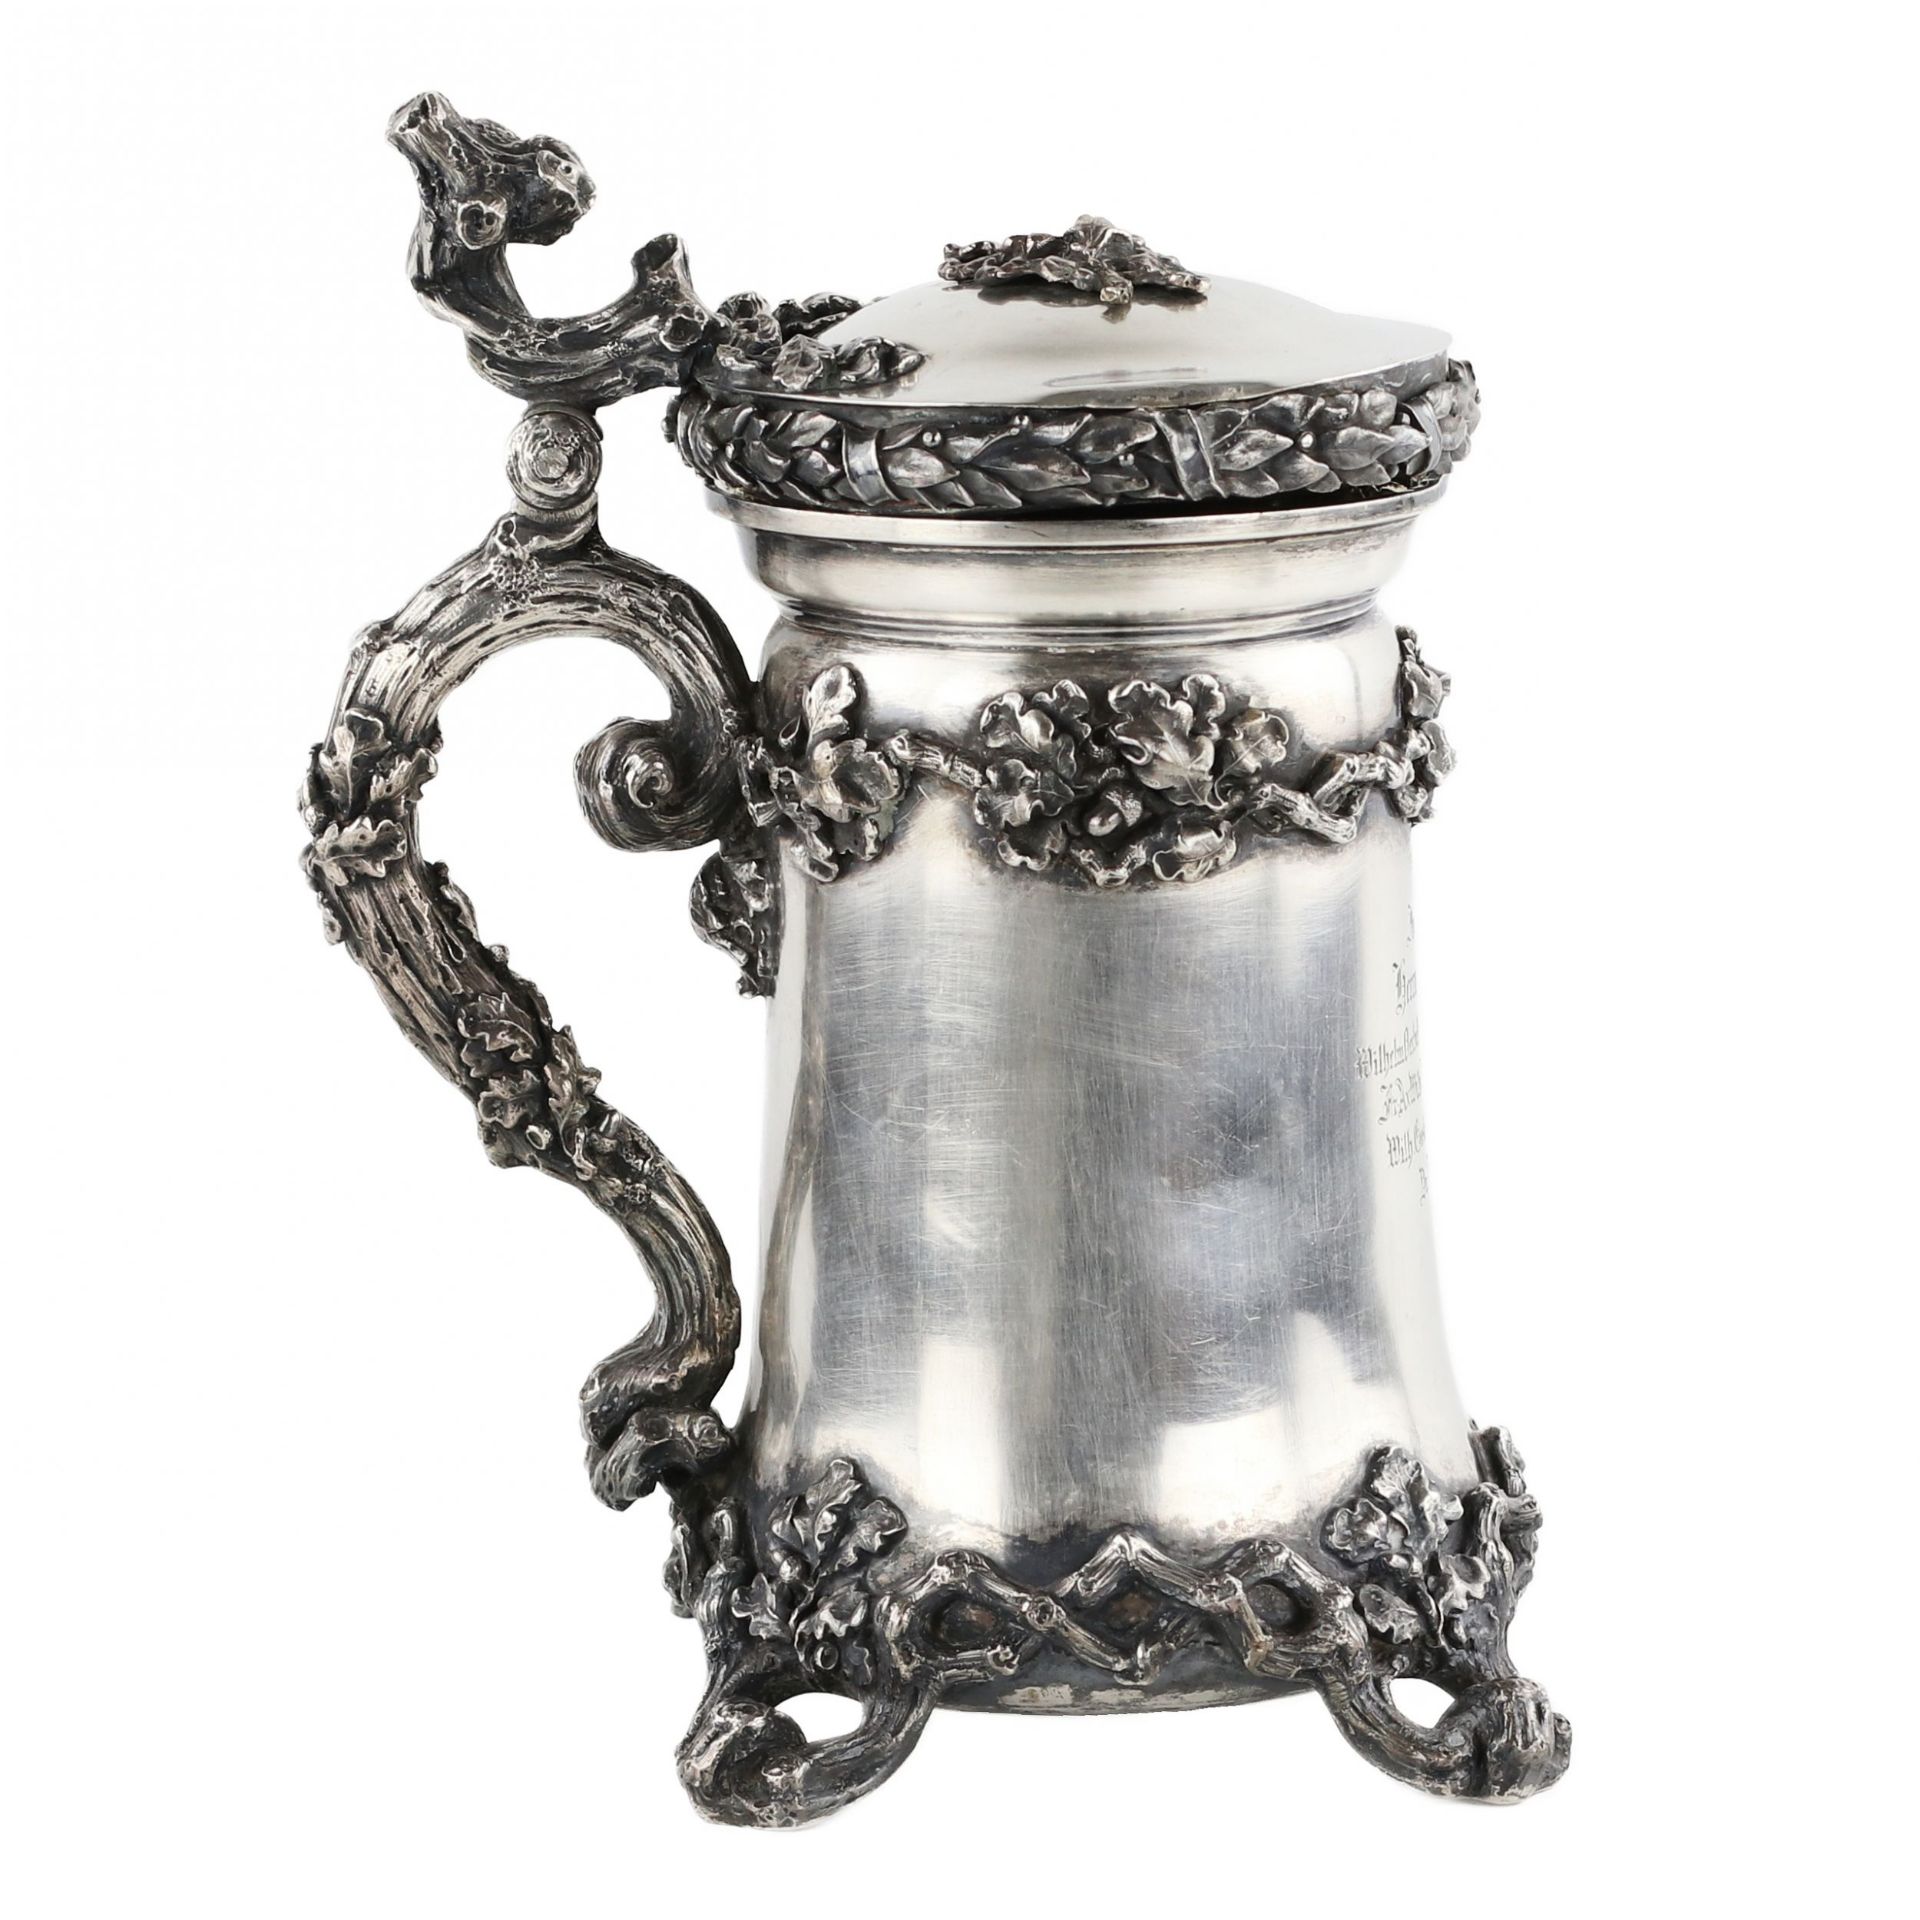 An impressive silver beer cup with oak branch pattern, mid 19th century. Berlin. - Image 3 of 9